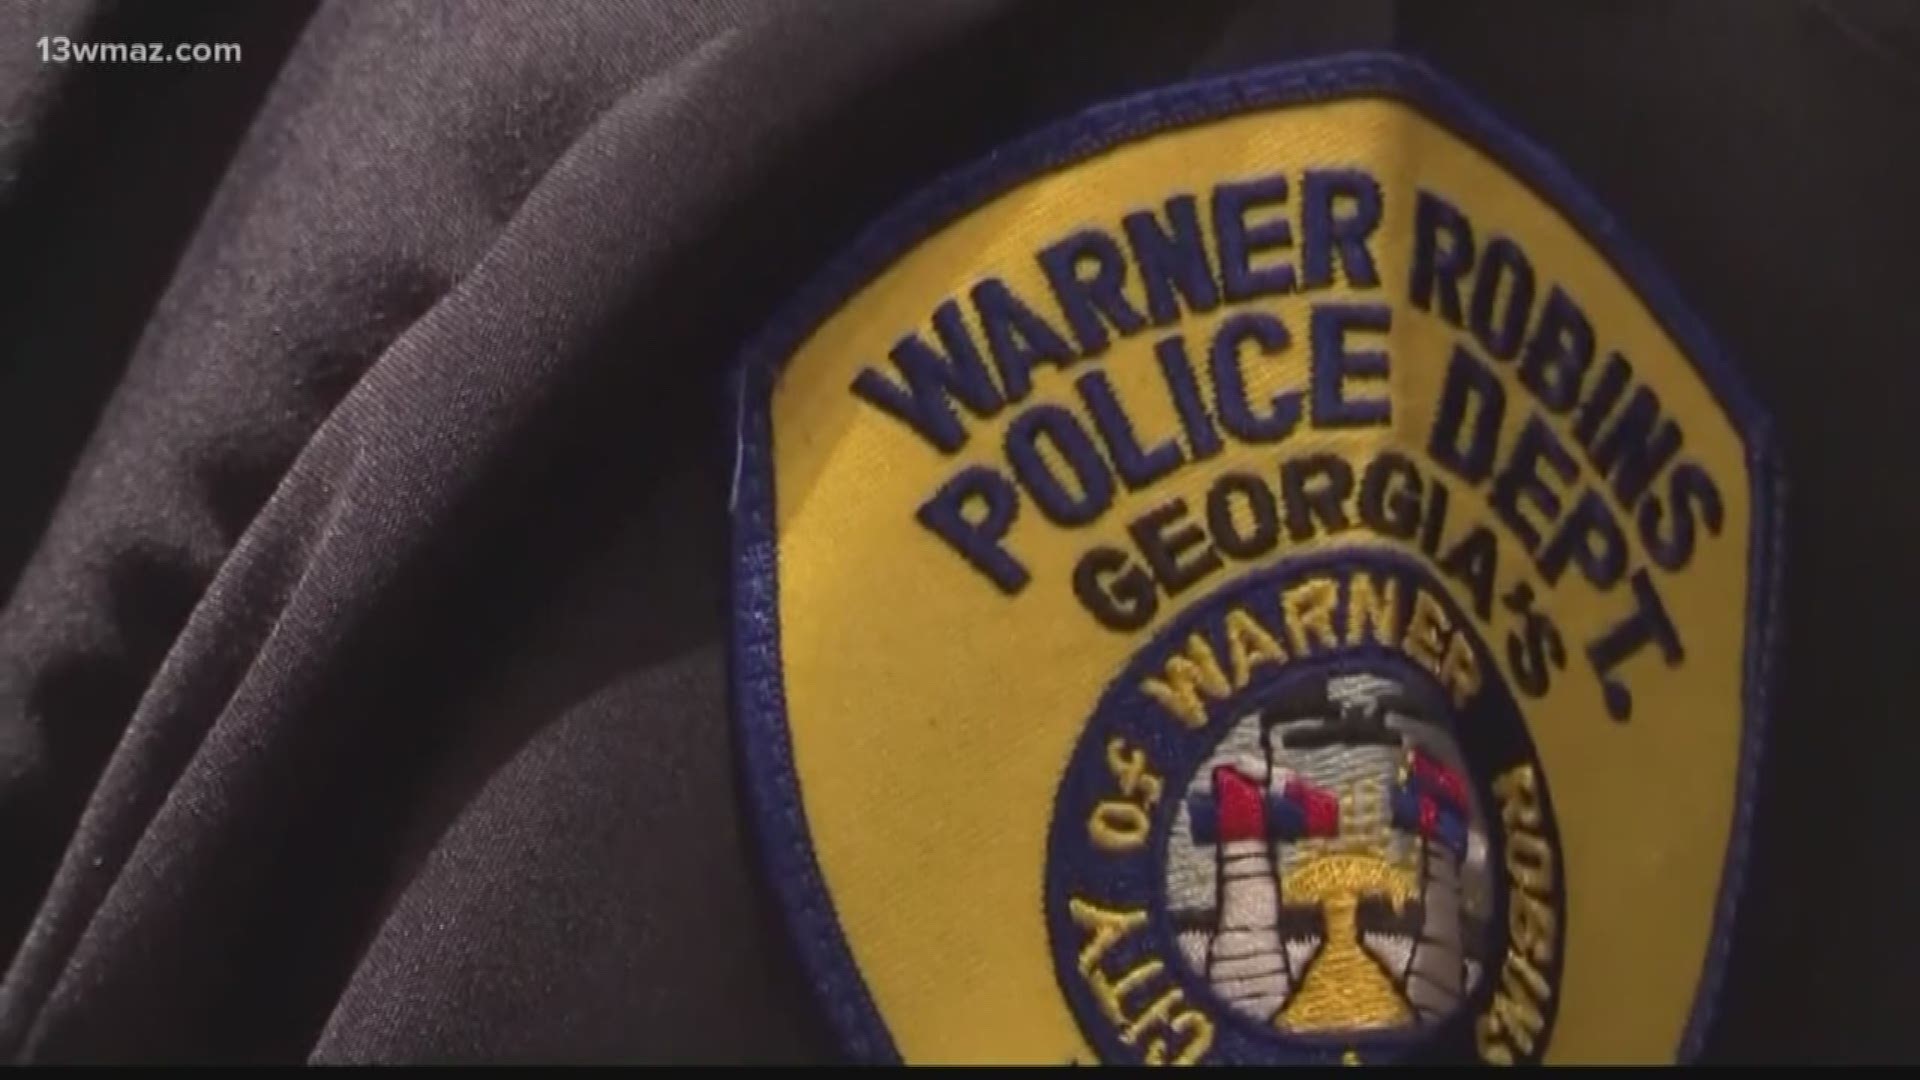 Georgia State Patrol says they've issued 24,862 citations total statewide. That number includes citations from the Georgia State Patrol, the Motor Carrier Compliance Division, and Capitol Police.